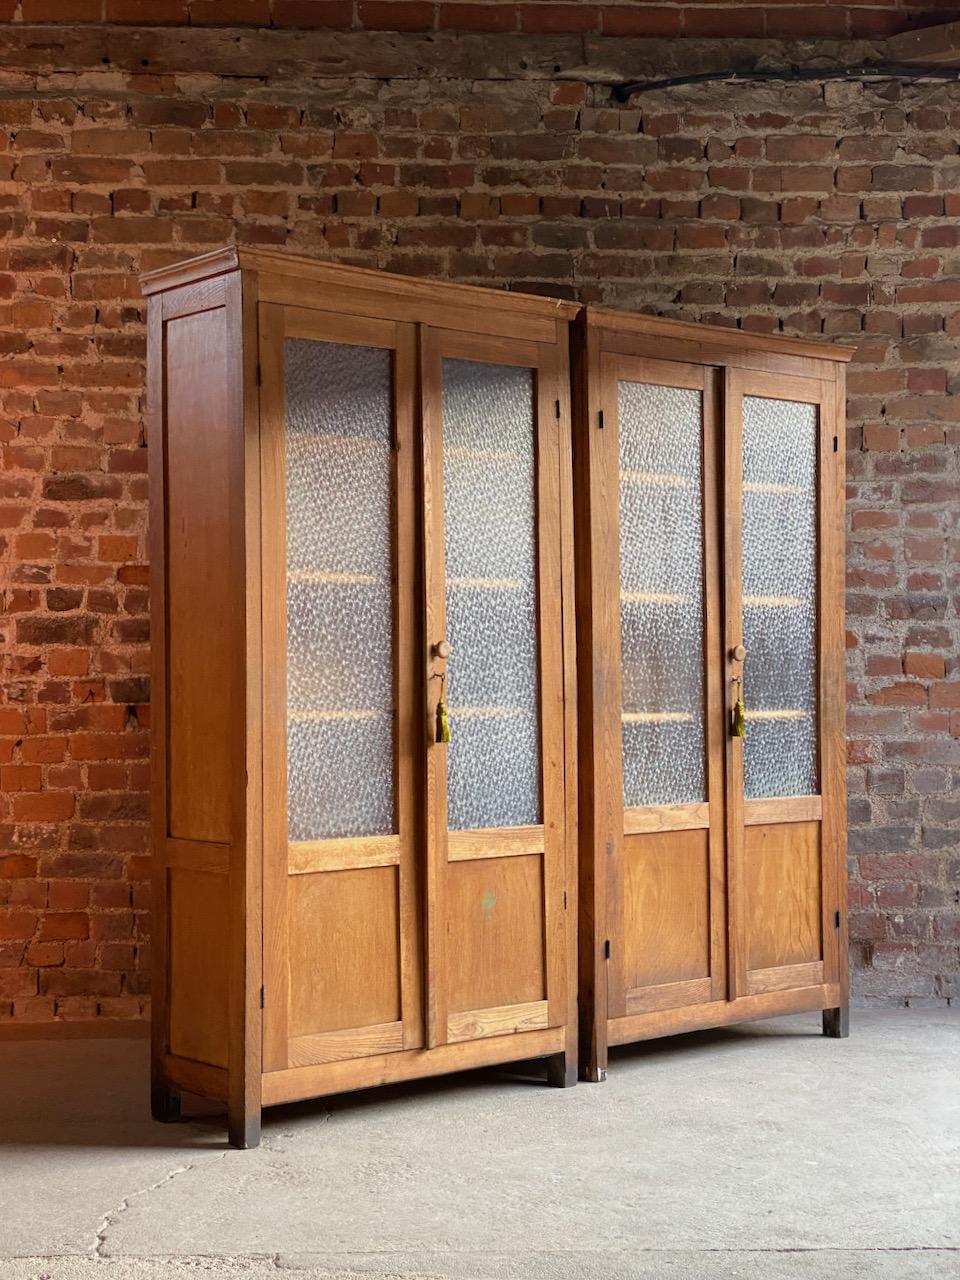 Apothecary Haberdashery cabinets circa 1930s numbers 1, 3, 6, 7,

Fabulous early 20th century Apothecary Pharmacy beech cabinet Ukraine circa 1930s, this piece is one of eleven similar pieces all from the same group of pharmacies in the